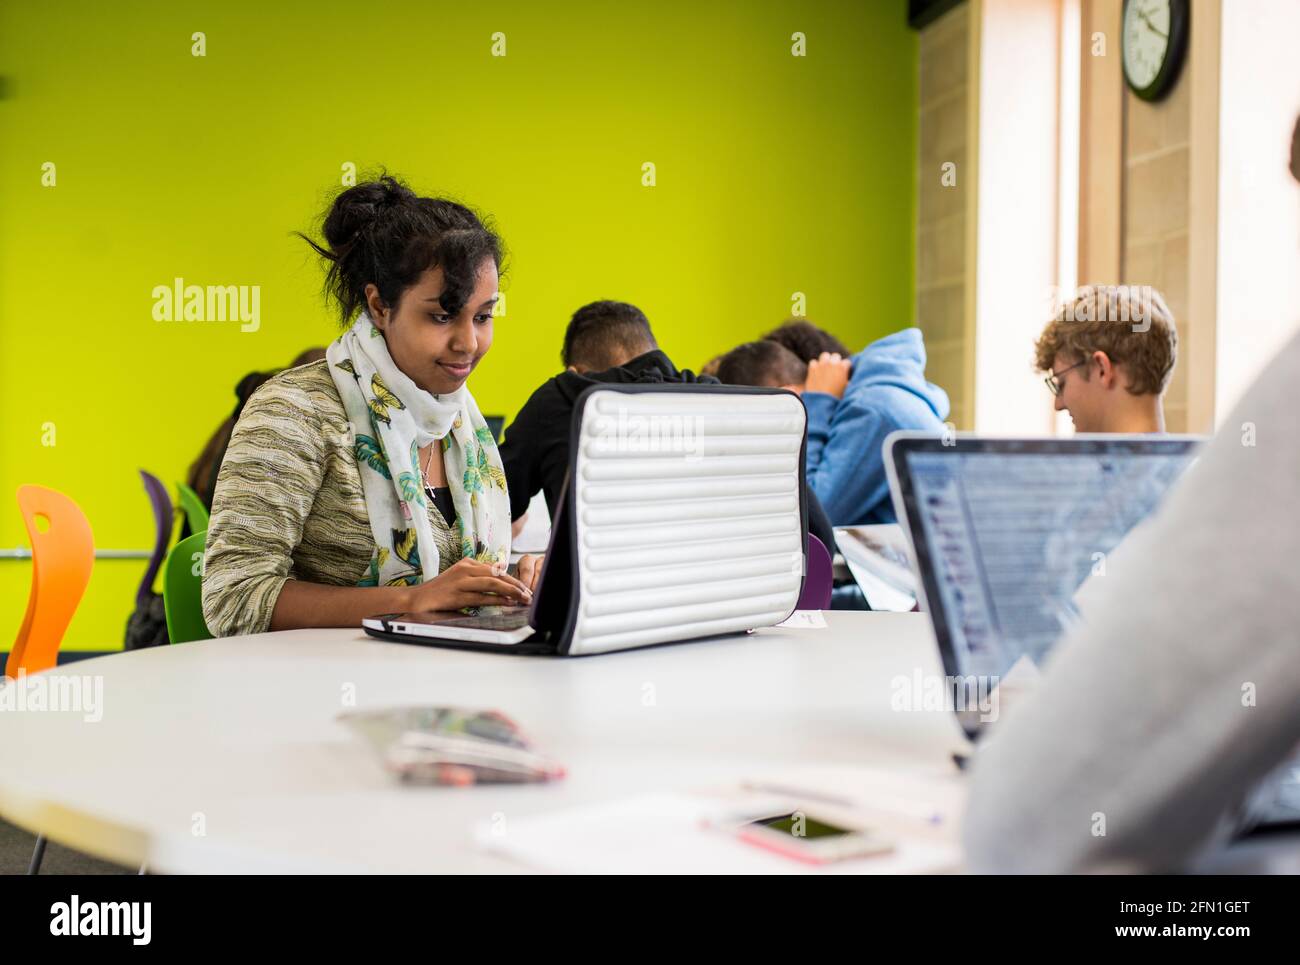 Female black sixth form student, young female in UK education, teenage girl looking at laptop, Indian female student working at laptop, student Stock Photo